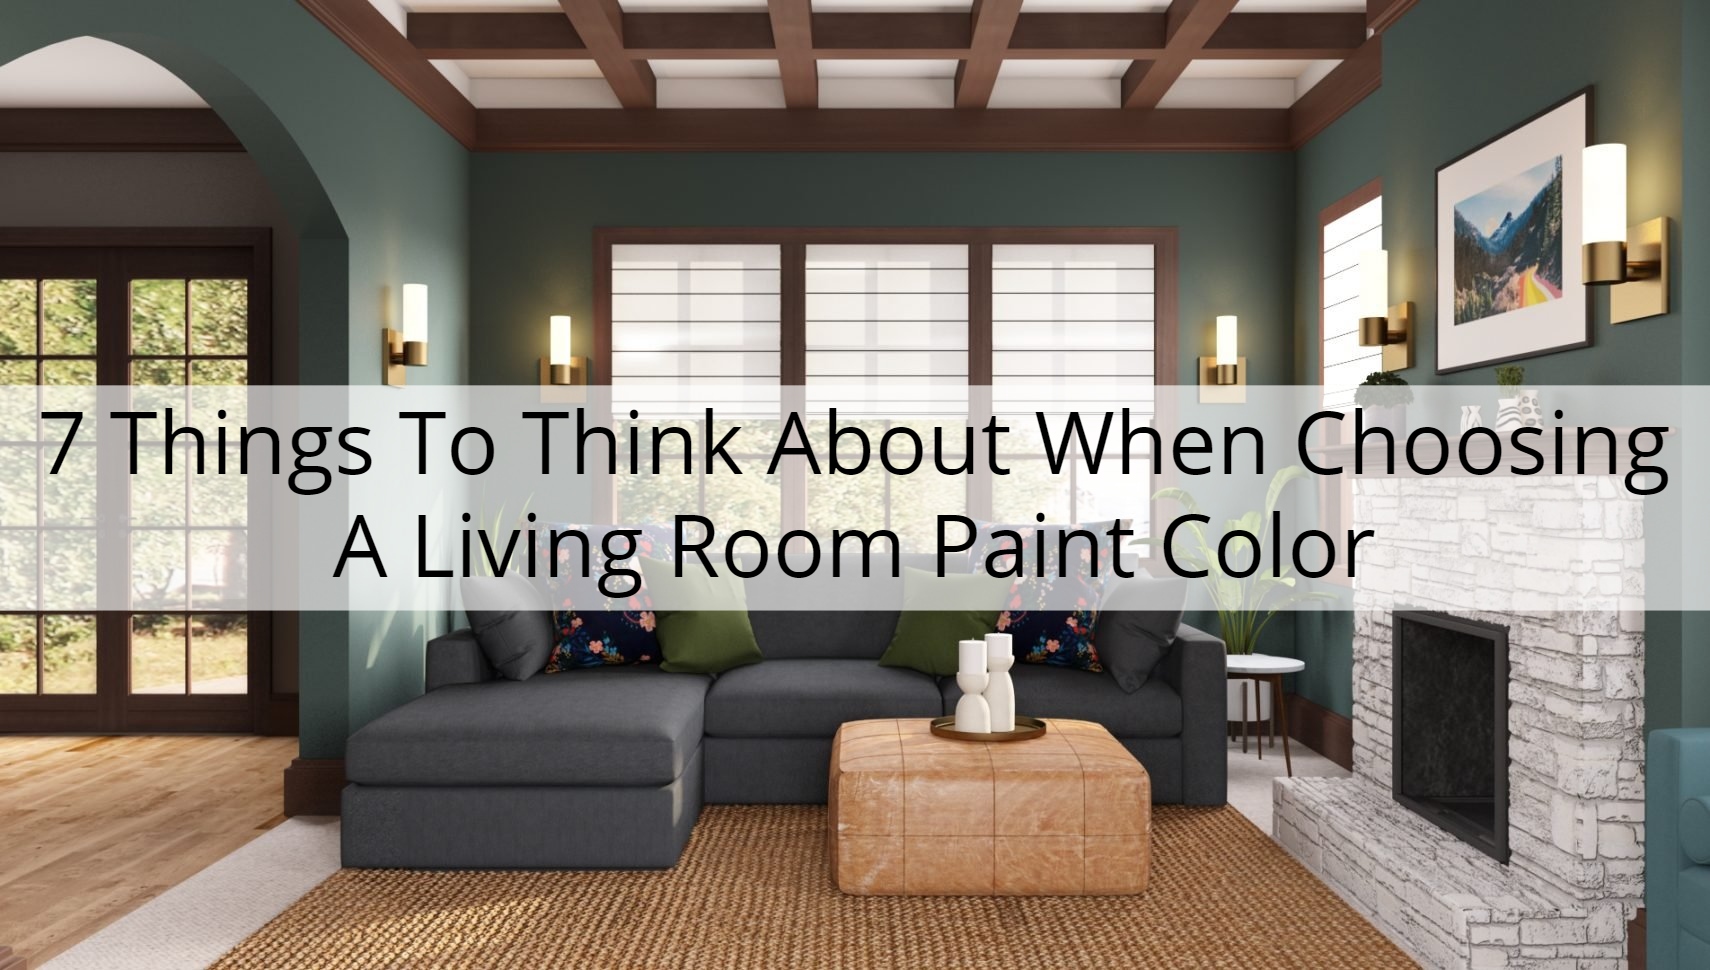 Things To Think About When Choosing A Living Room Paint Color